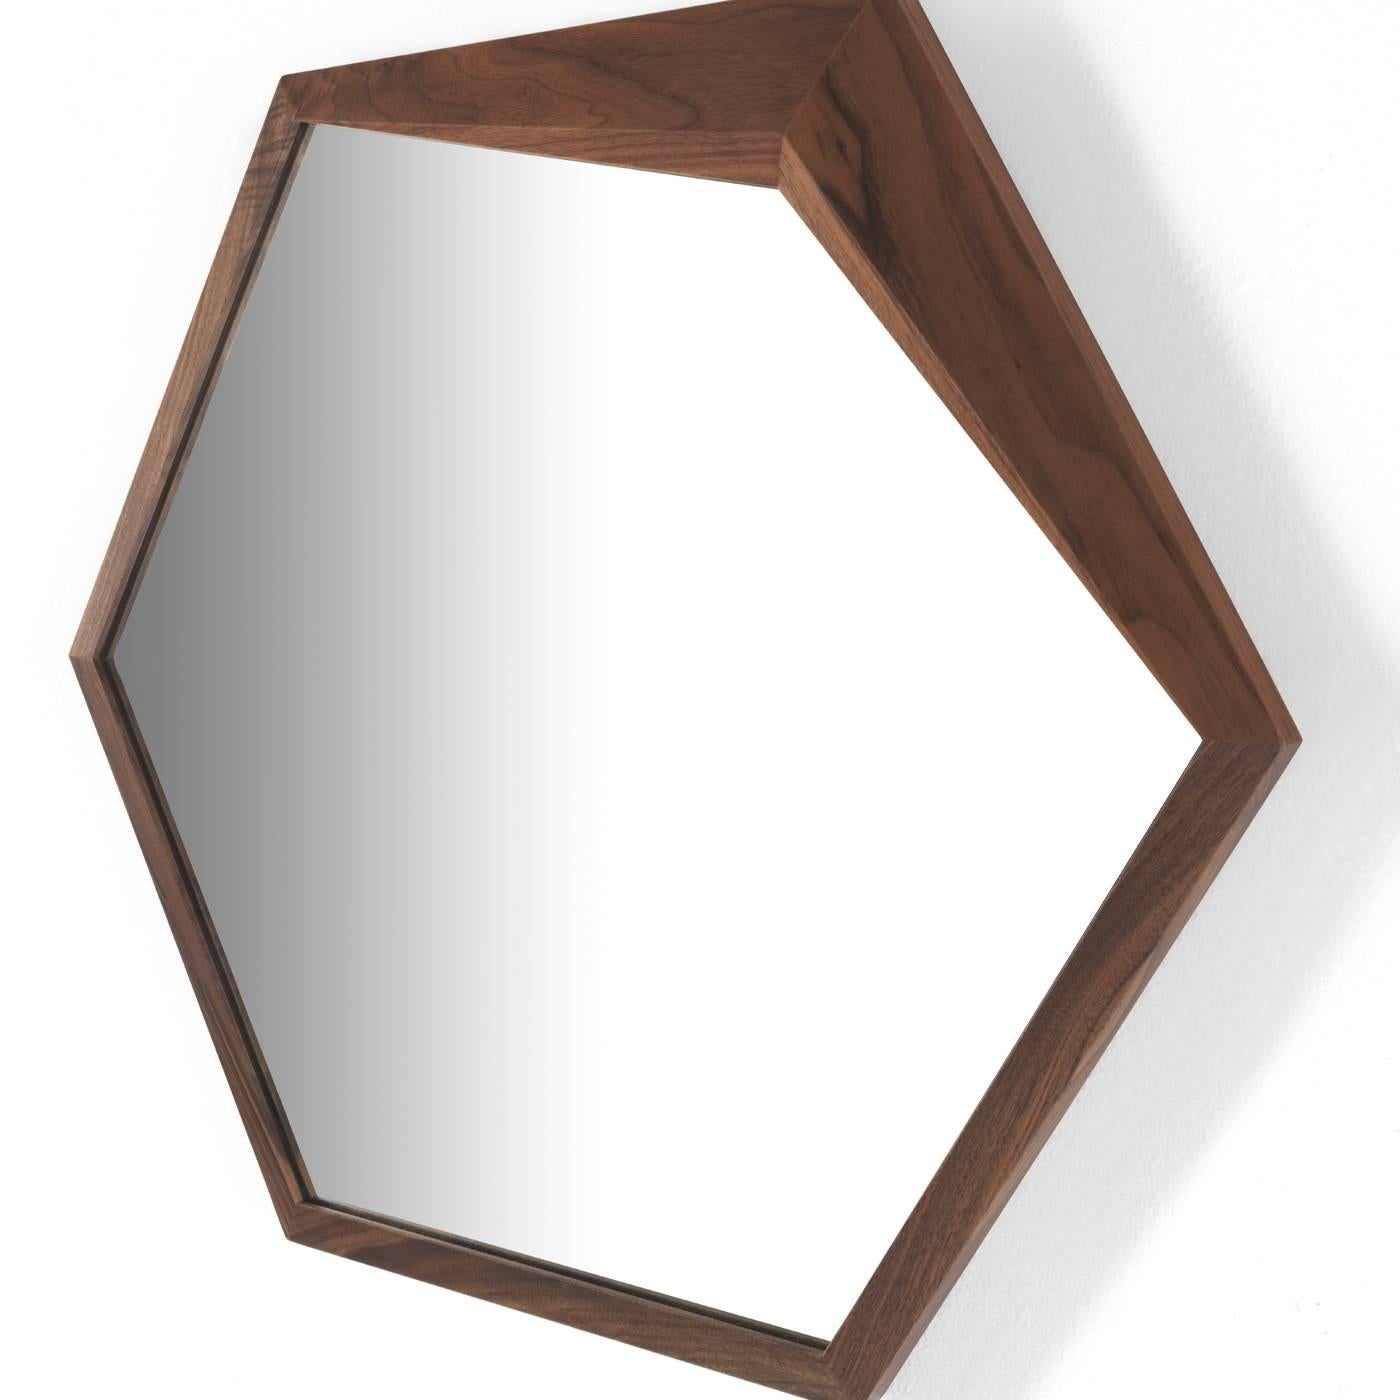 The Minimalist shape of this hexagonal mirror is framed in an exquisite solid walnut structure that has a charming accent in one of its corners where the wood gets thicker, adding a modern flair to this timeless object of functional decor. A stylish